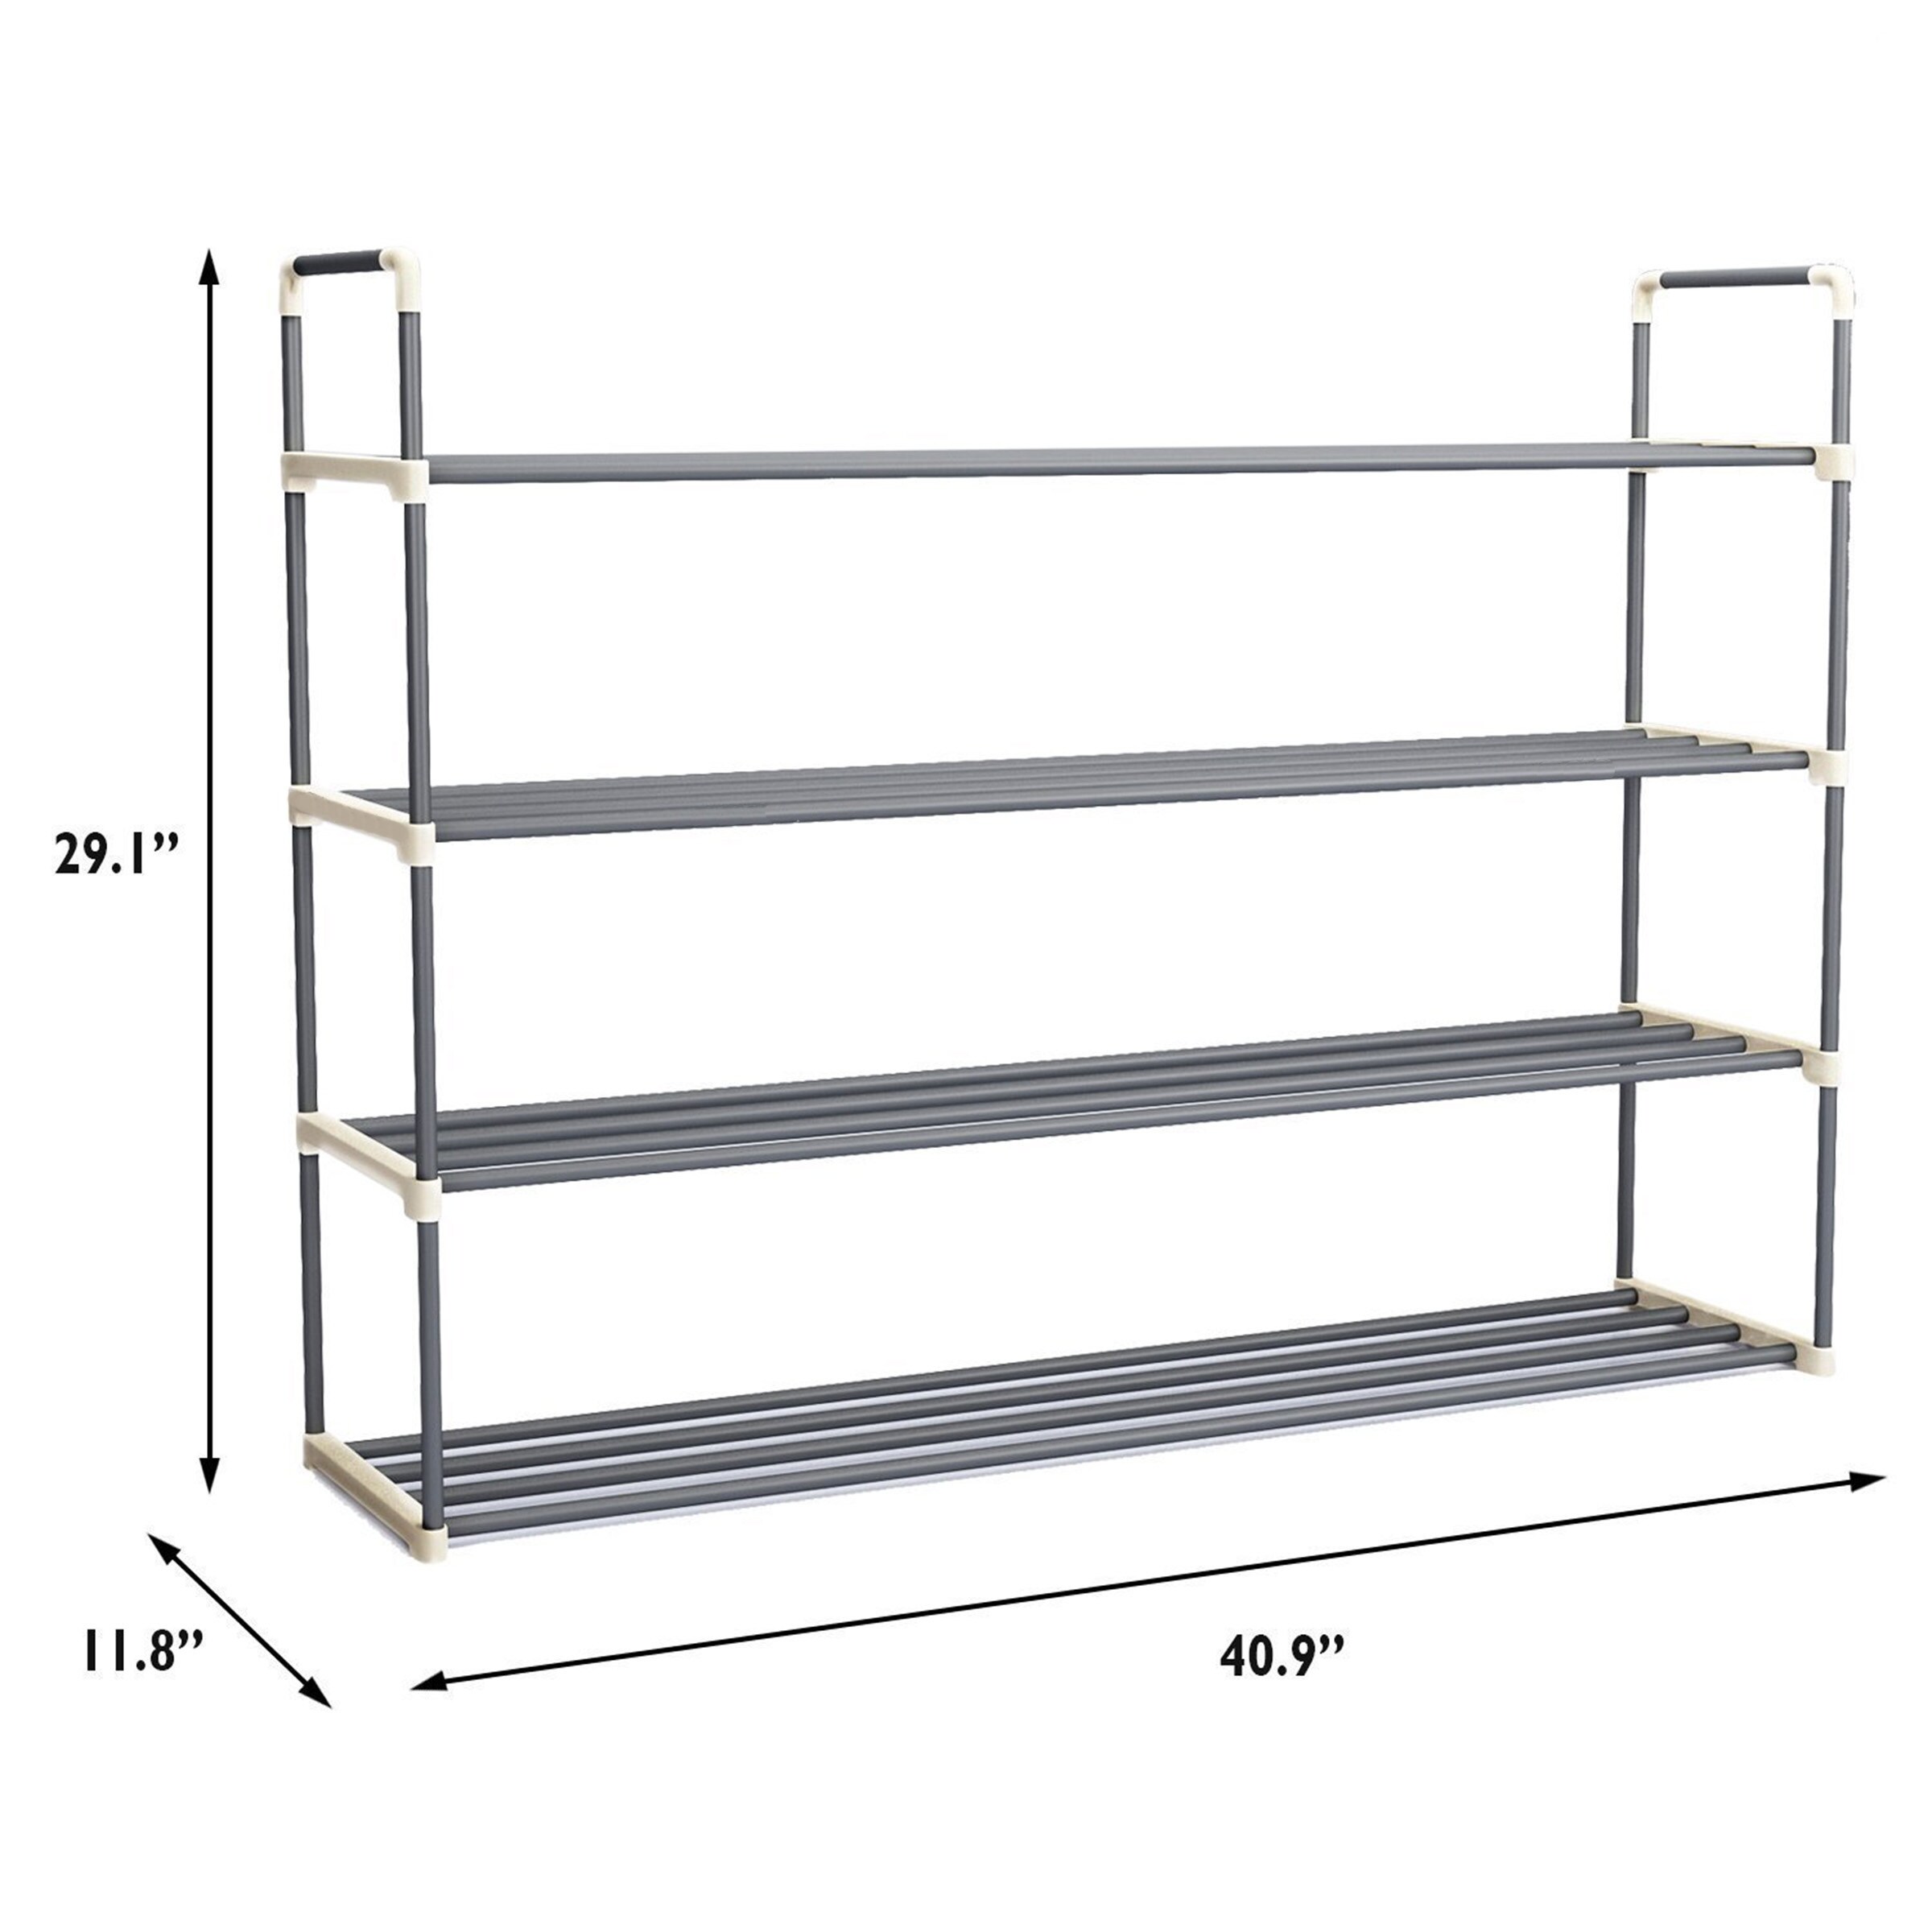 https://ak1.ostkcdn.com/images/products/is/images/direct/1d82ea5b3c4c3bb0bd1ac1b9181b629a4ff03cd2/Hastings-Home-Multi-Tier-Shoe-Storage-Rack.jpg